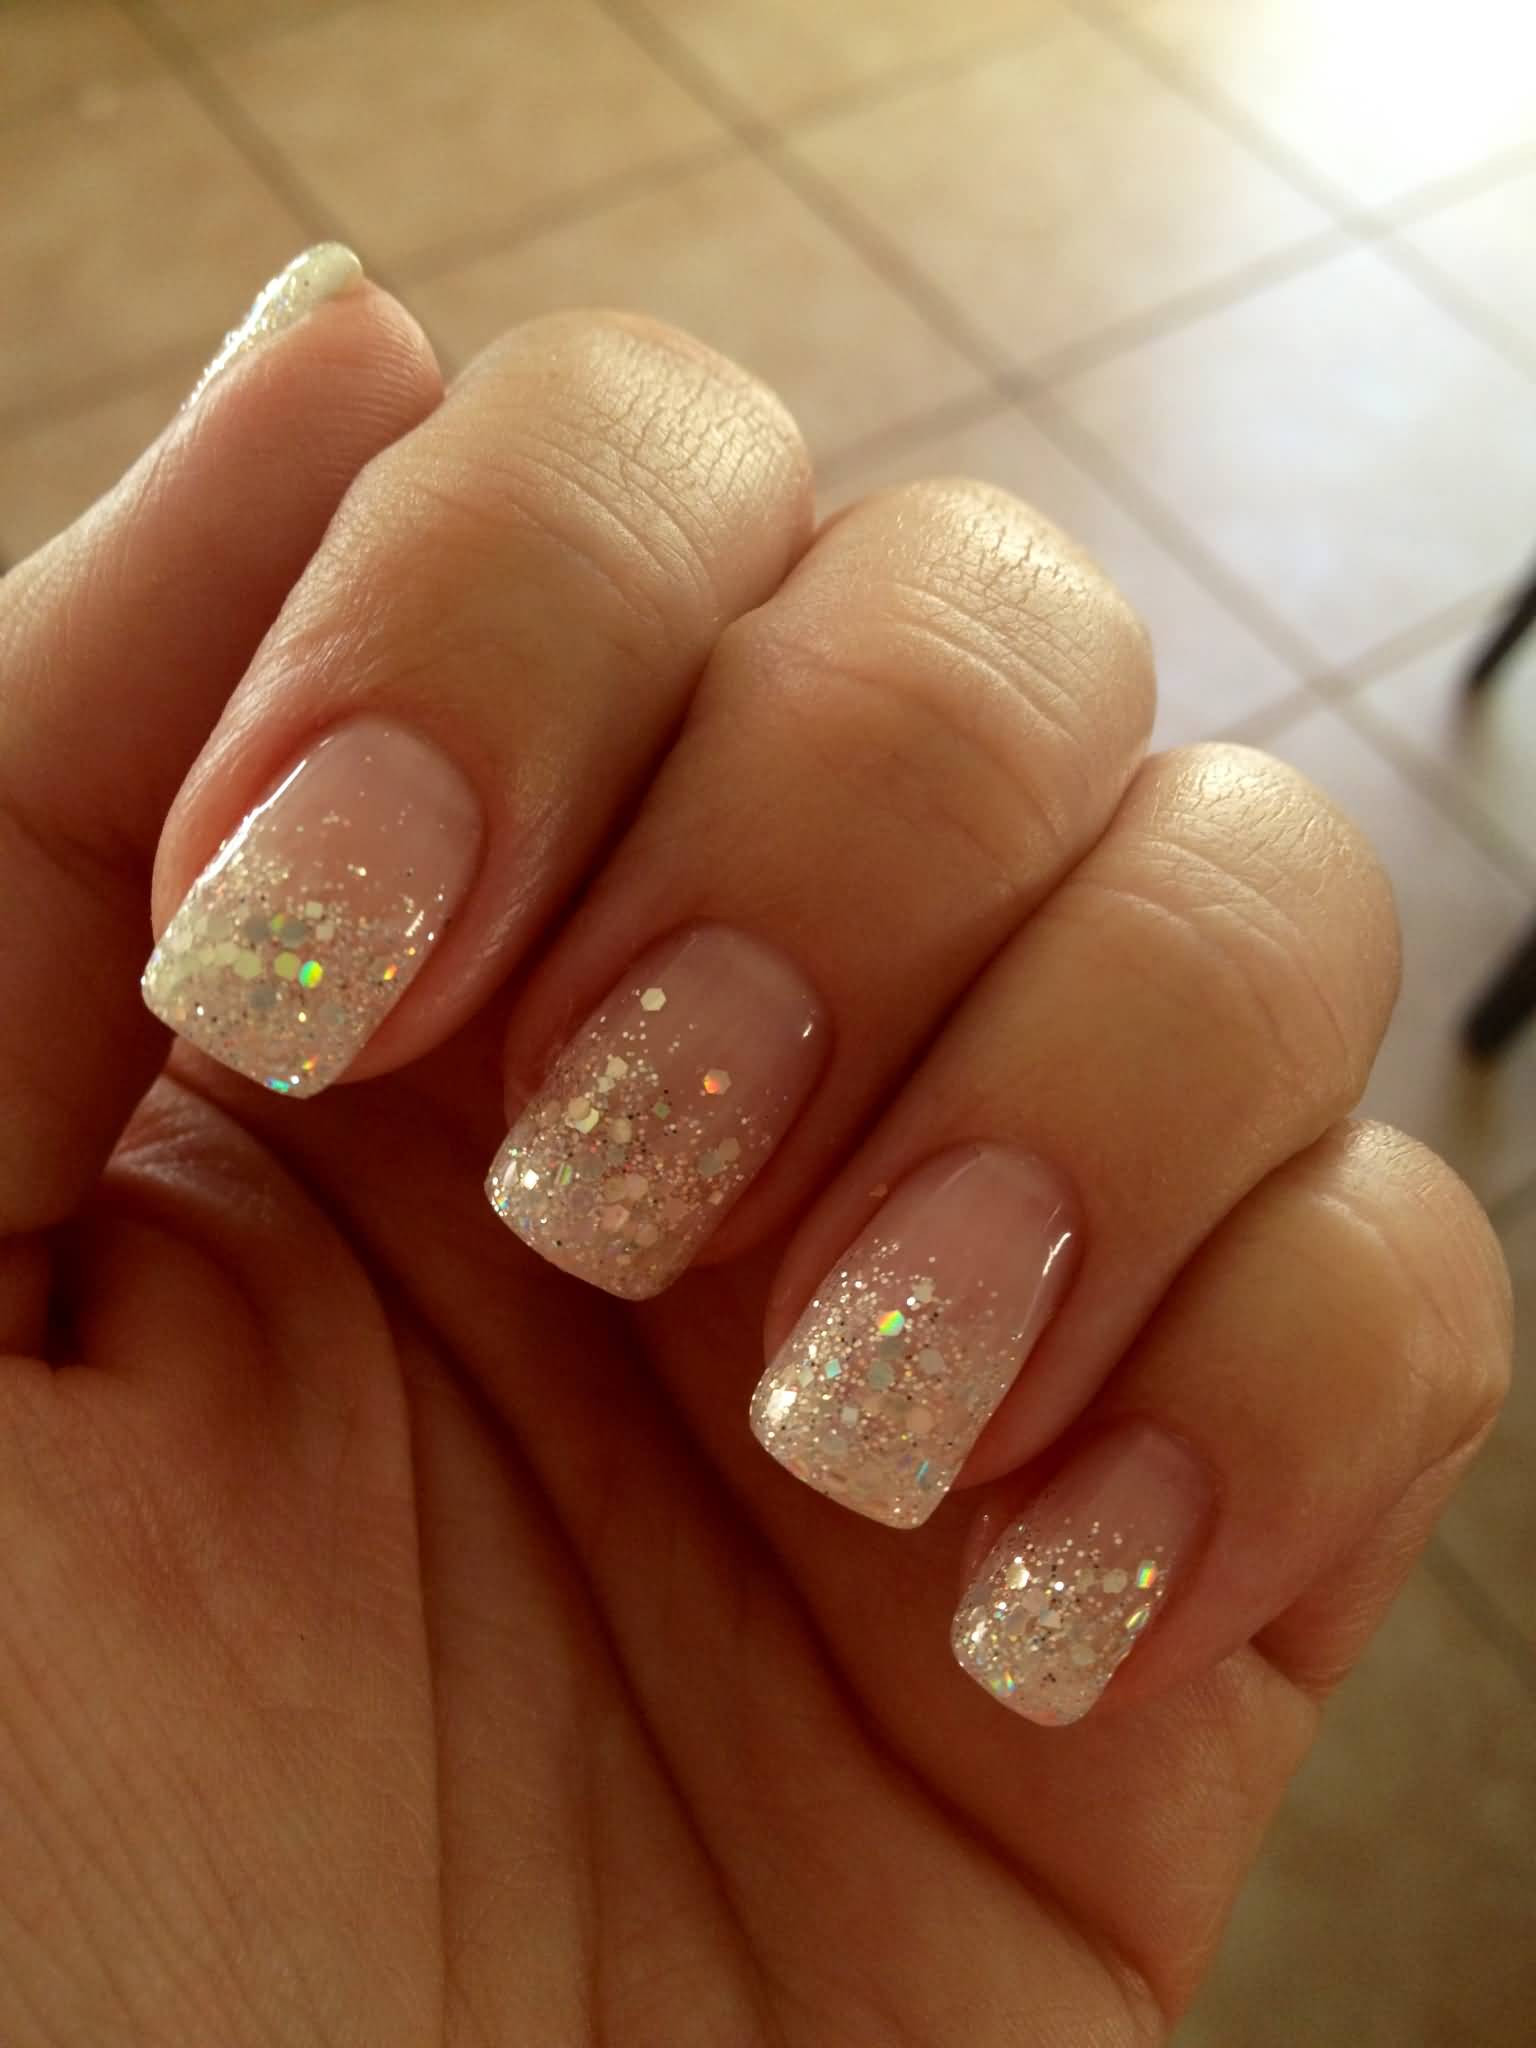 Glitter Tip Acrylic Nails
 50 Most Beautiful Glitter French Tip Nail Art Design Ideas